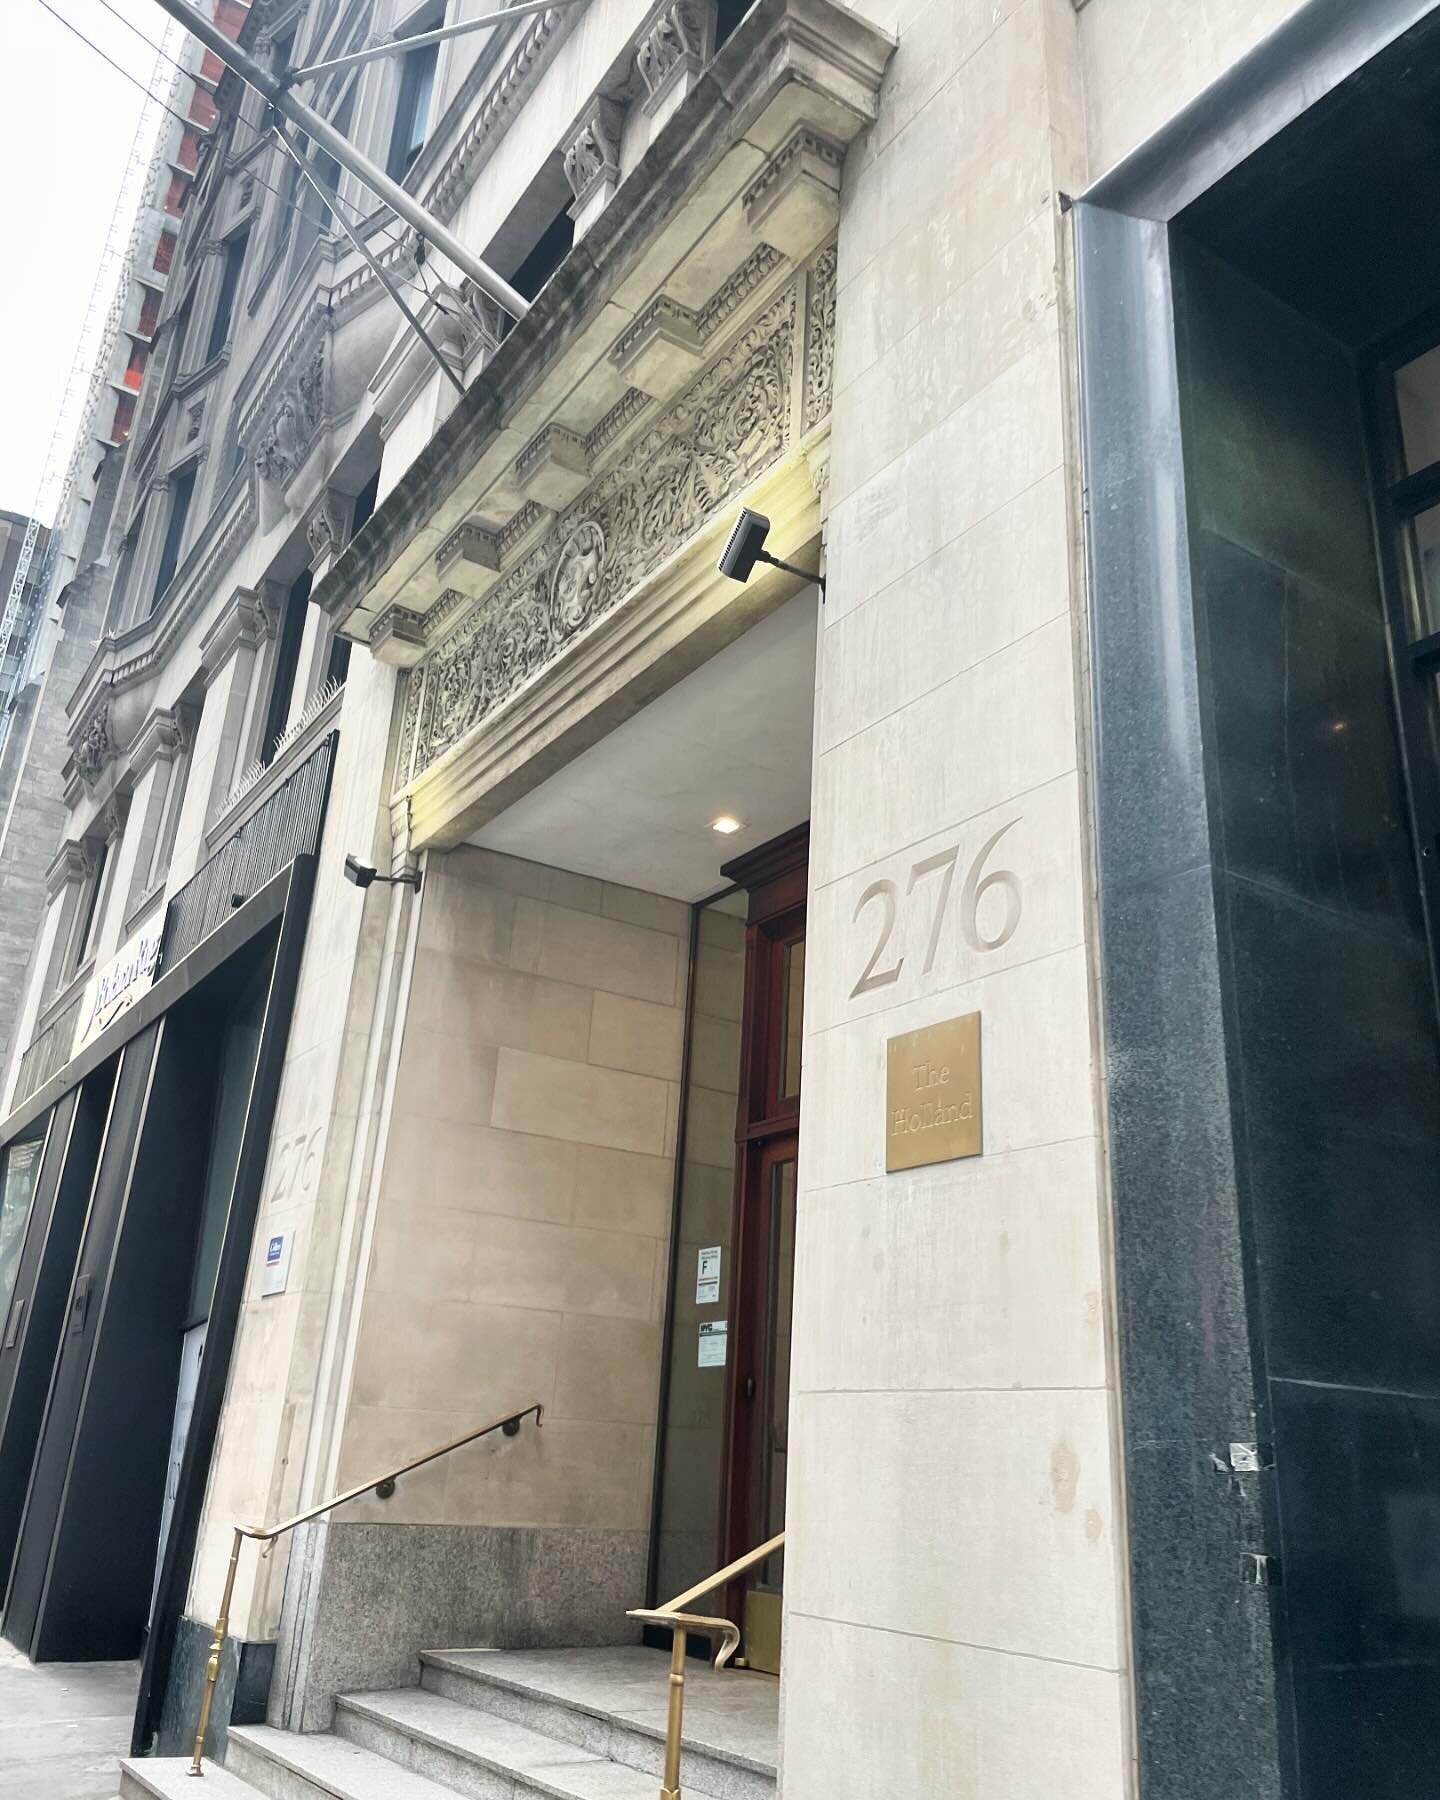 If someone told me a year ago that I&rsquo;d have my own business with the address on 5th Avenue I would be like, &ldquo;are you crazy?!&rdquo; 

I&rsquo;ve been planning behind the scenes to make some dreams come true! I can&rsquo;t wait to share wh